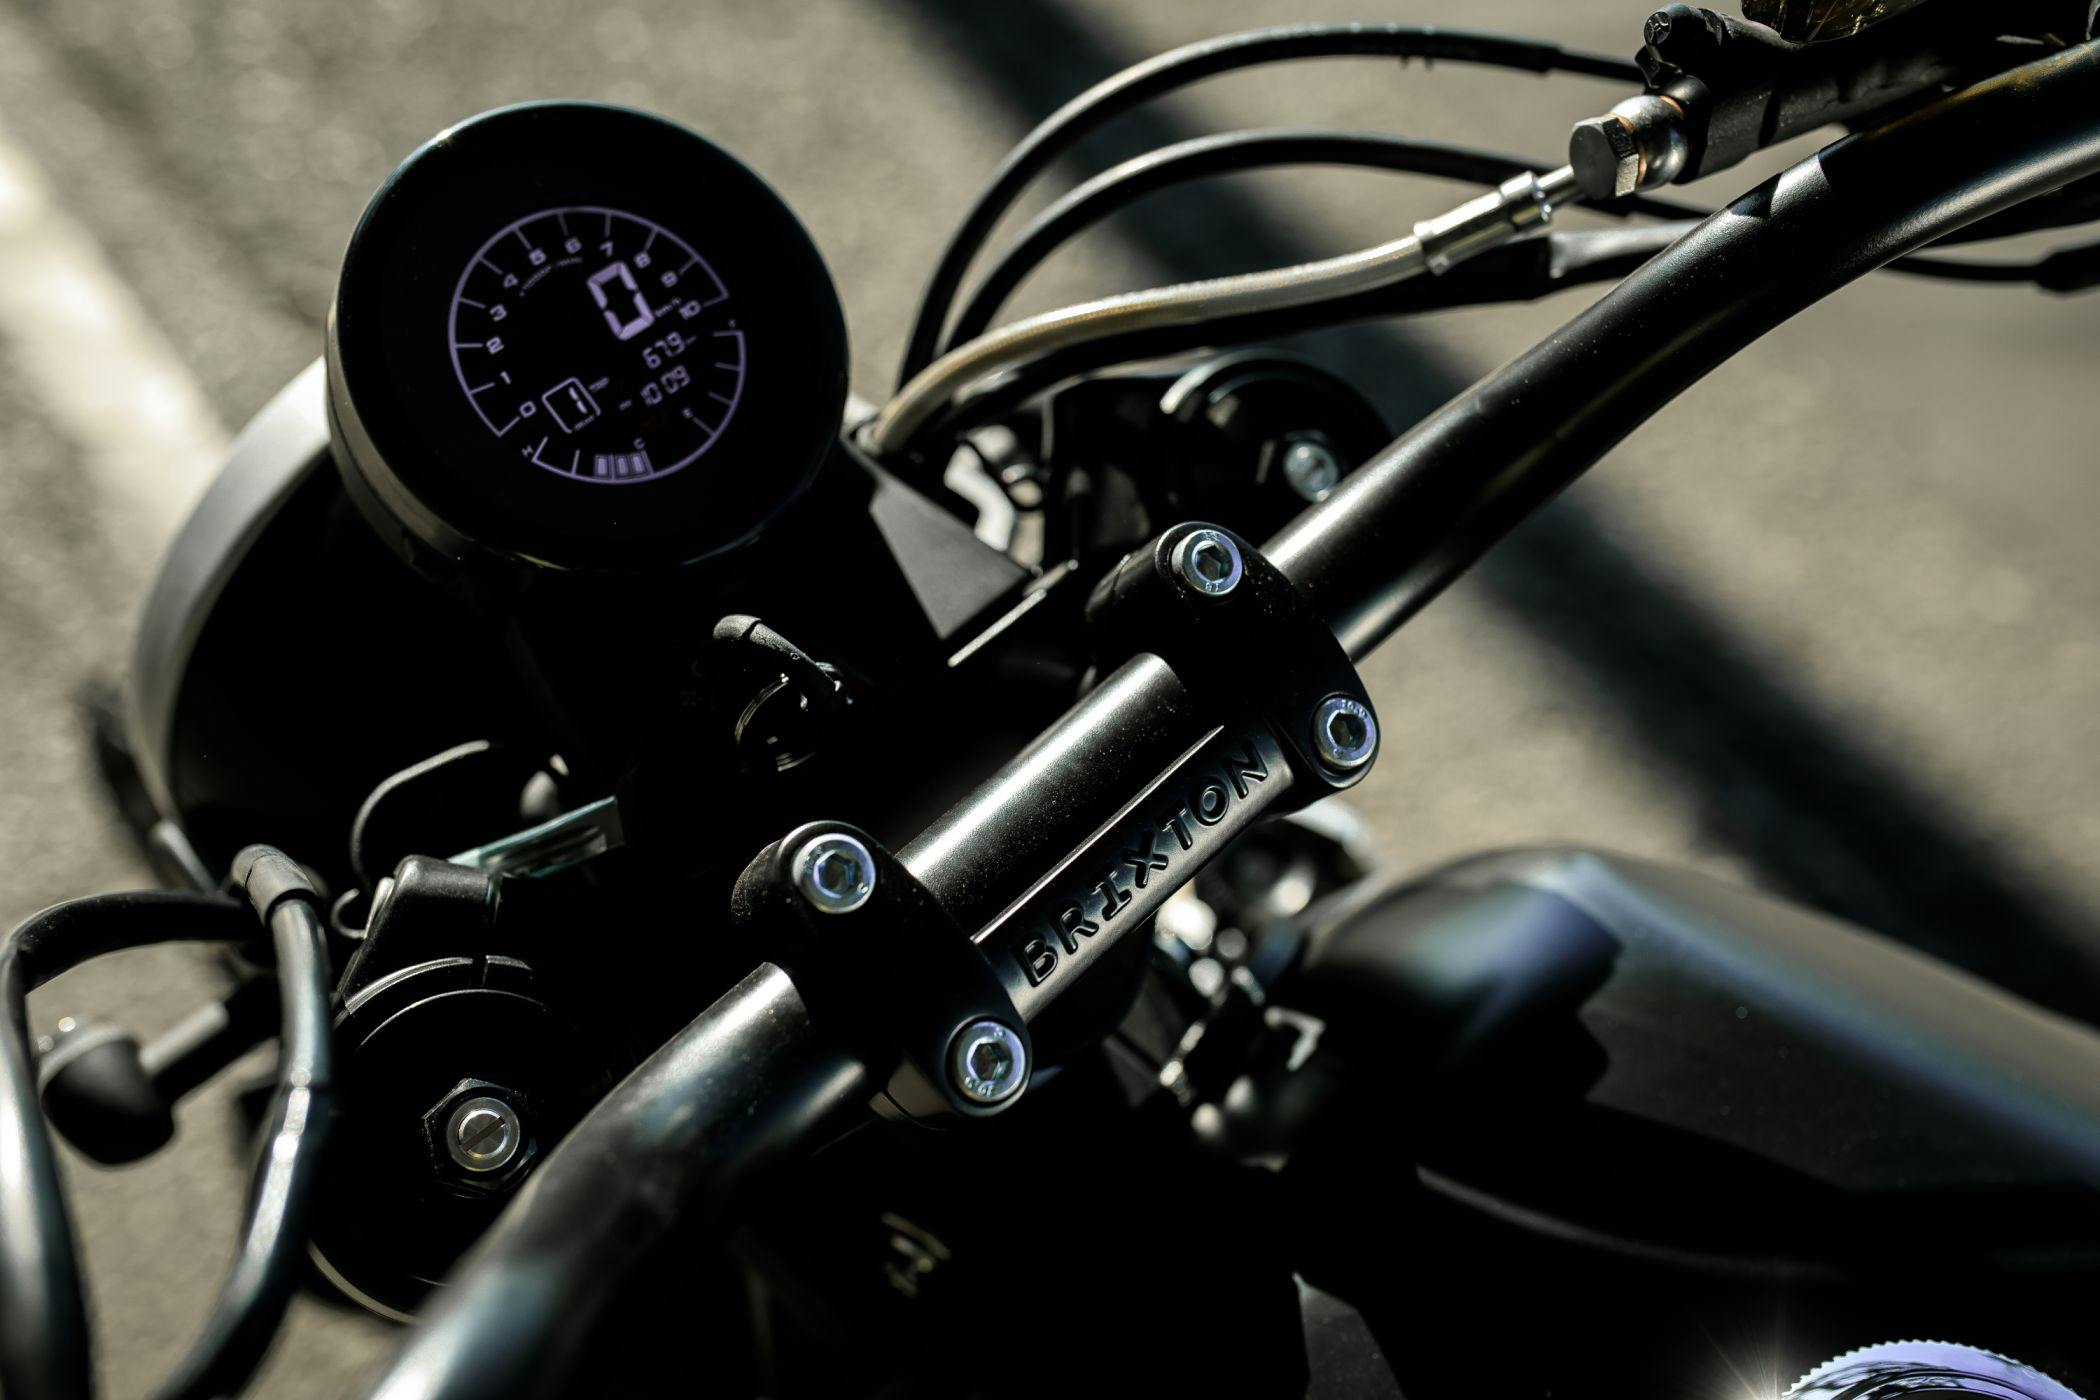 Brixton Crossfire 500 X in Backstage Black close-up of the handlebar and circular LC display